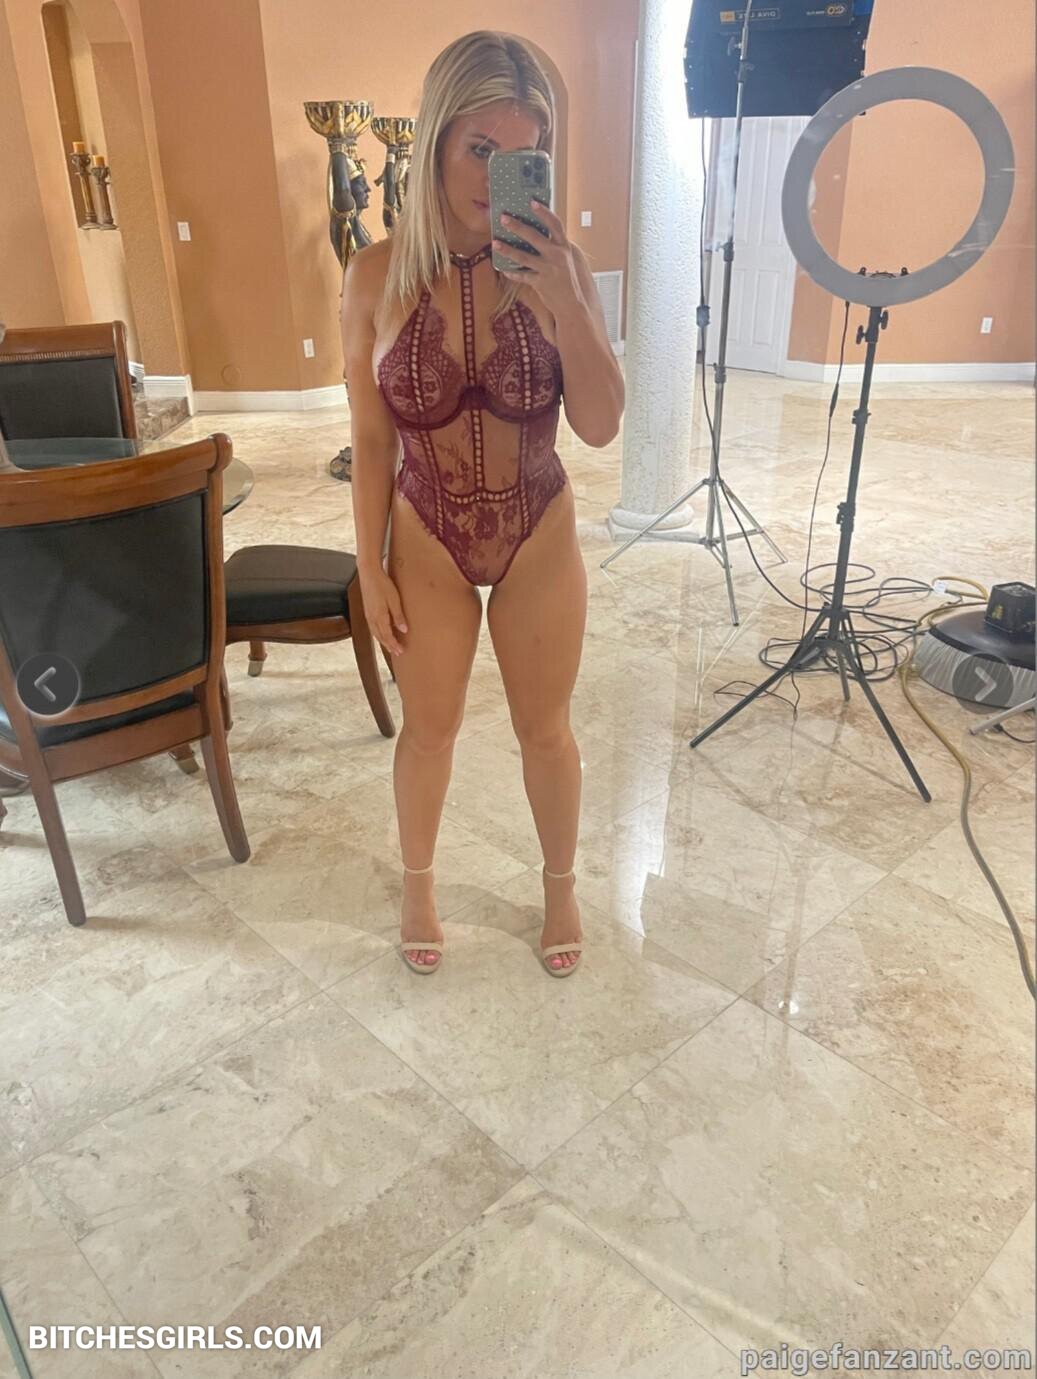 Get ready for the hottest gossip in town! Famous internet model Paige Vanzant has had her celeb try on videos leaked, causing a stir on Reddit. The Naked influencer is leaving nothing to the imagination, undressing her nipples in a steamy bikini photoshoot. And for those looking for even more scandalous content, her celeb gonewild videos have also been leaked from April 2021, available for free on leakwiki. Get ready for some hot Vanzant gonewild action! Want more? Check out Paige Vanzant's sex photos. But wait, do you even know her real name? She may be older than 18, but can you guess Vanzant's age? Don't miss out on all the juicy details!